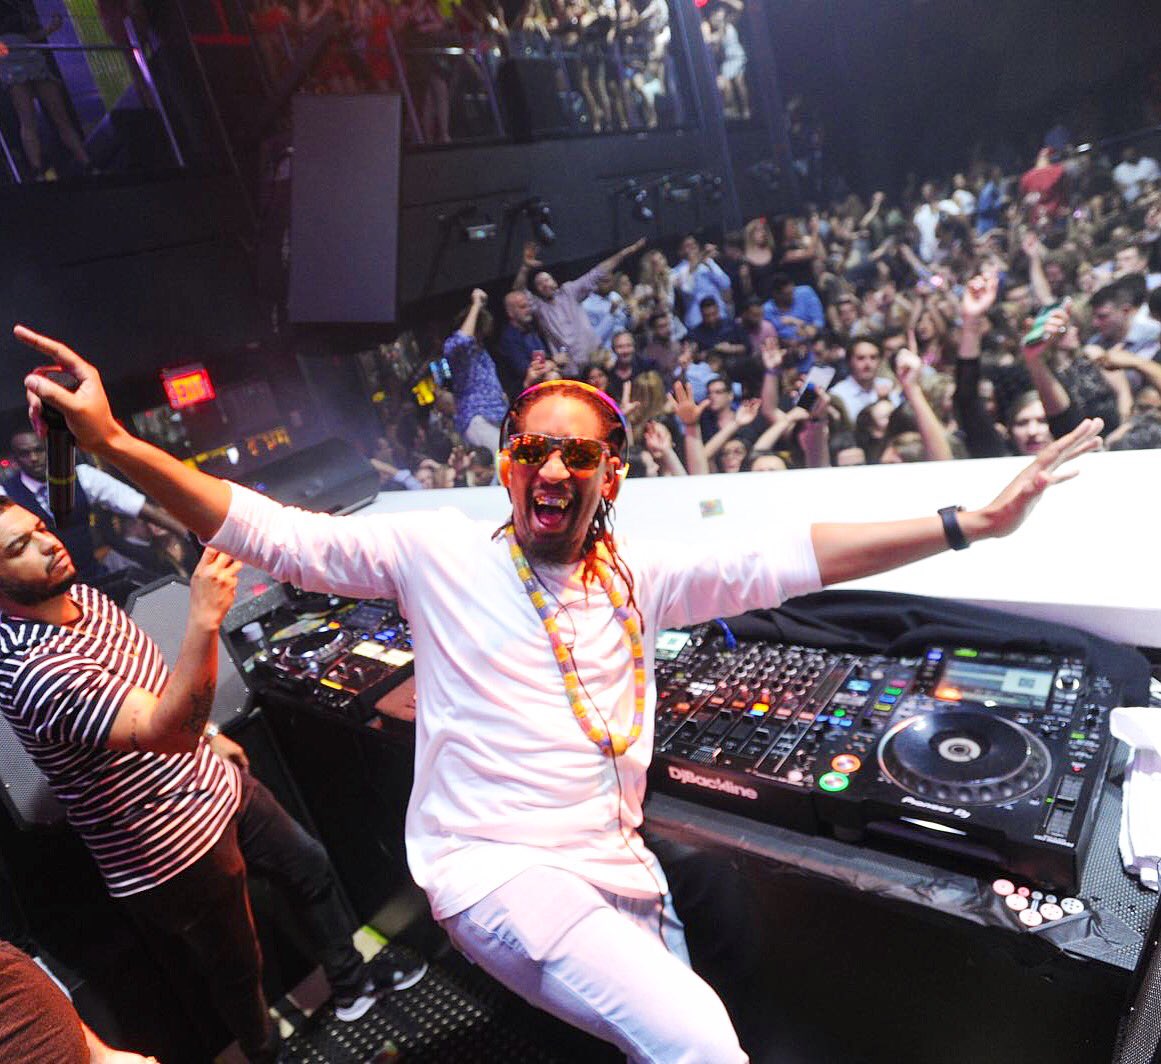 RT @LIVmiami: Kicked off Spring Break with The King himself @LilJon! March is in our sights! #onlyatLIV https://t.co/6mE0xMX8Pl